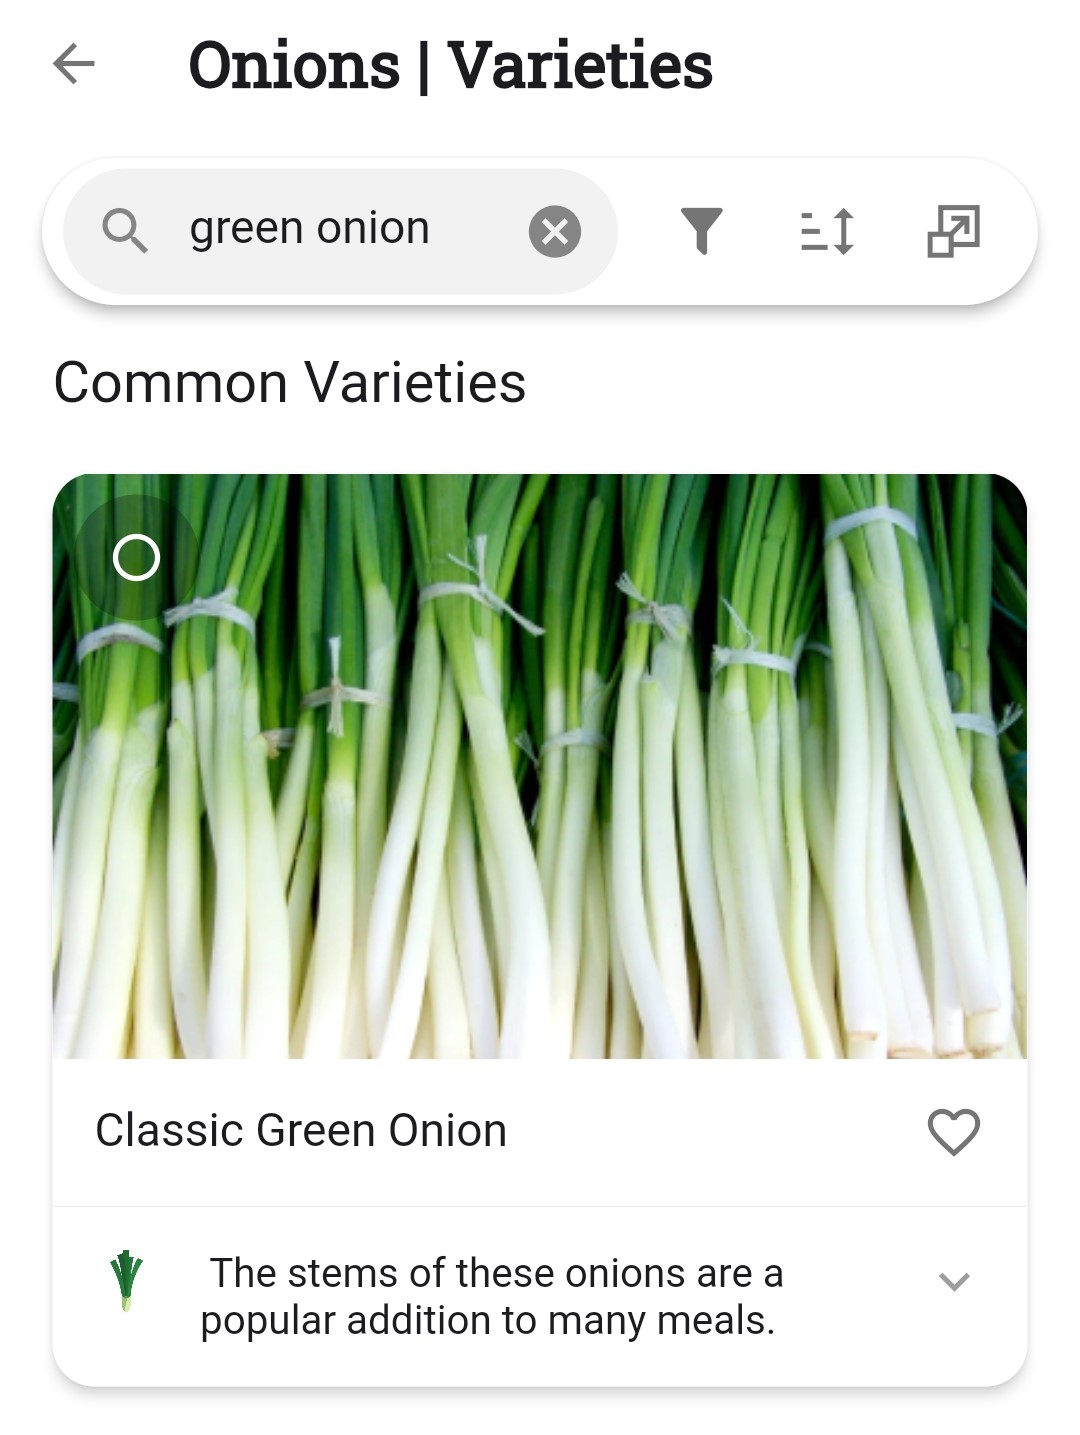 Screenshot of green onions as a variety of onions